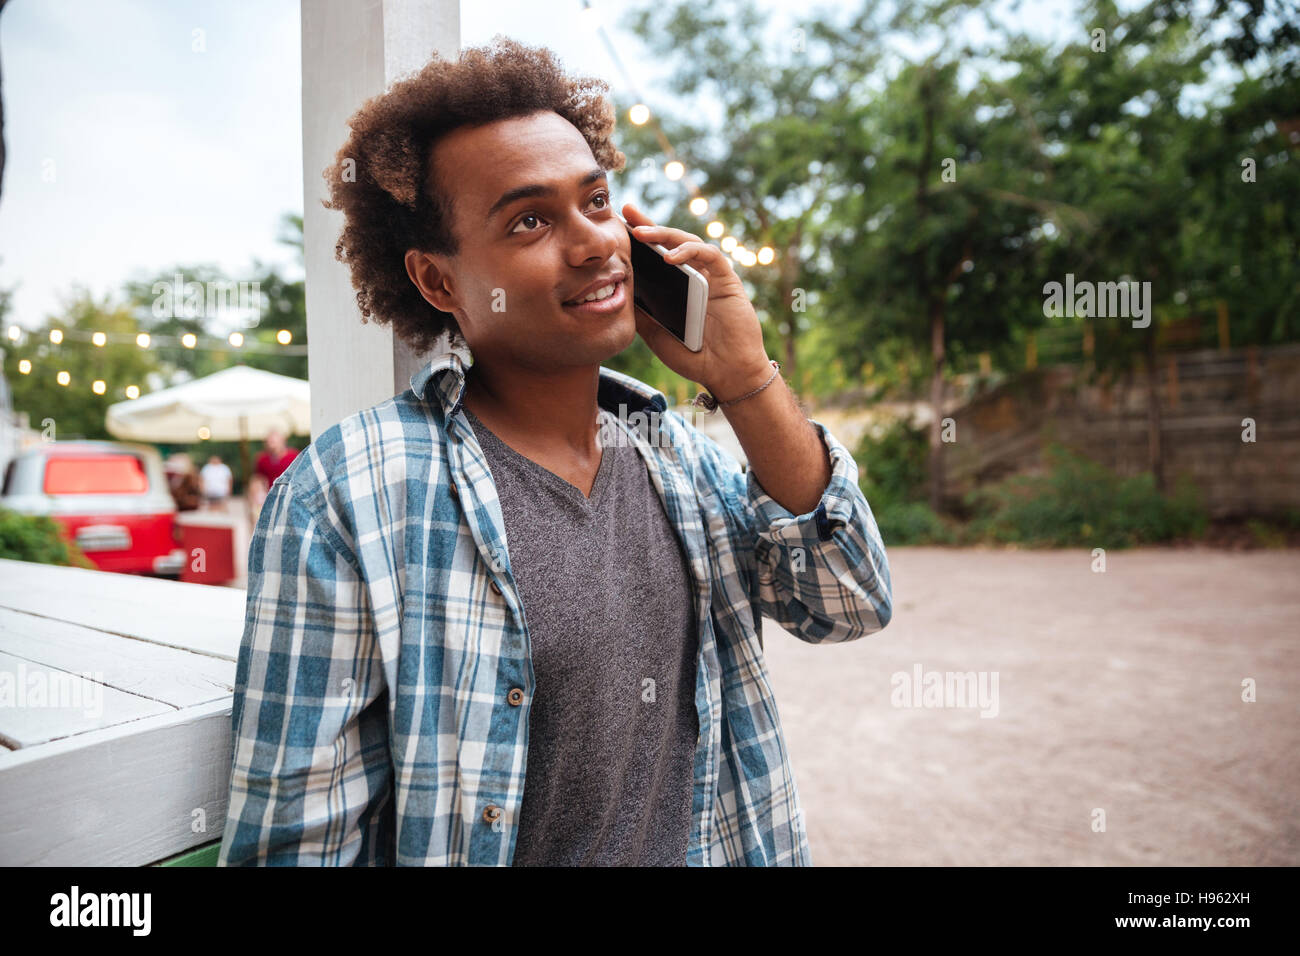 Happy african young man standing and talking on cell phone outdoors Banque D'Images